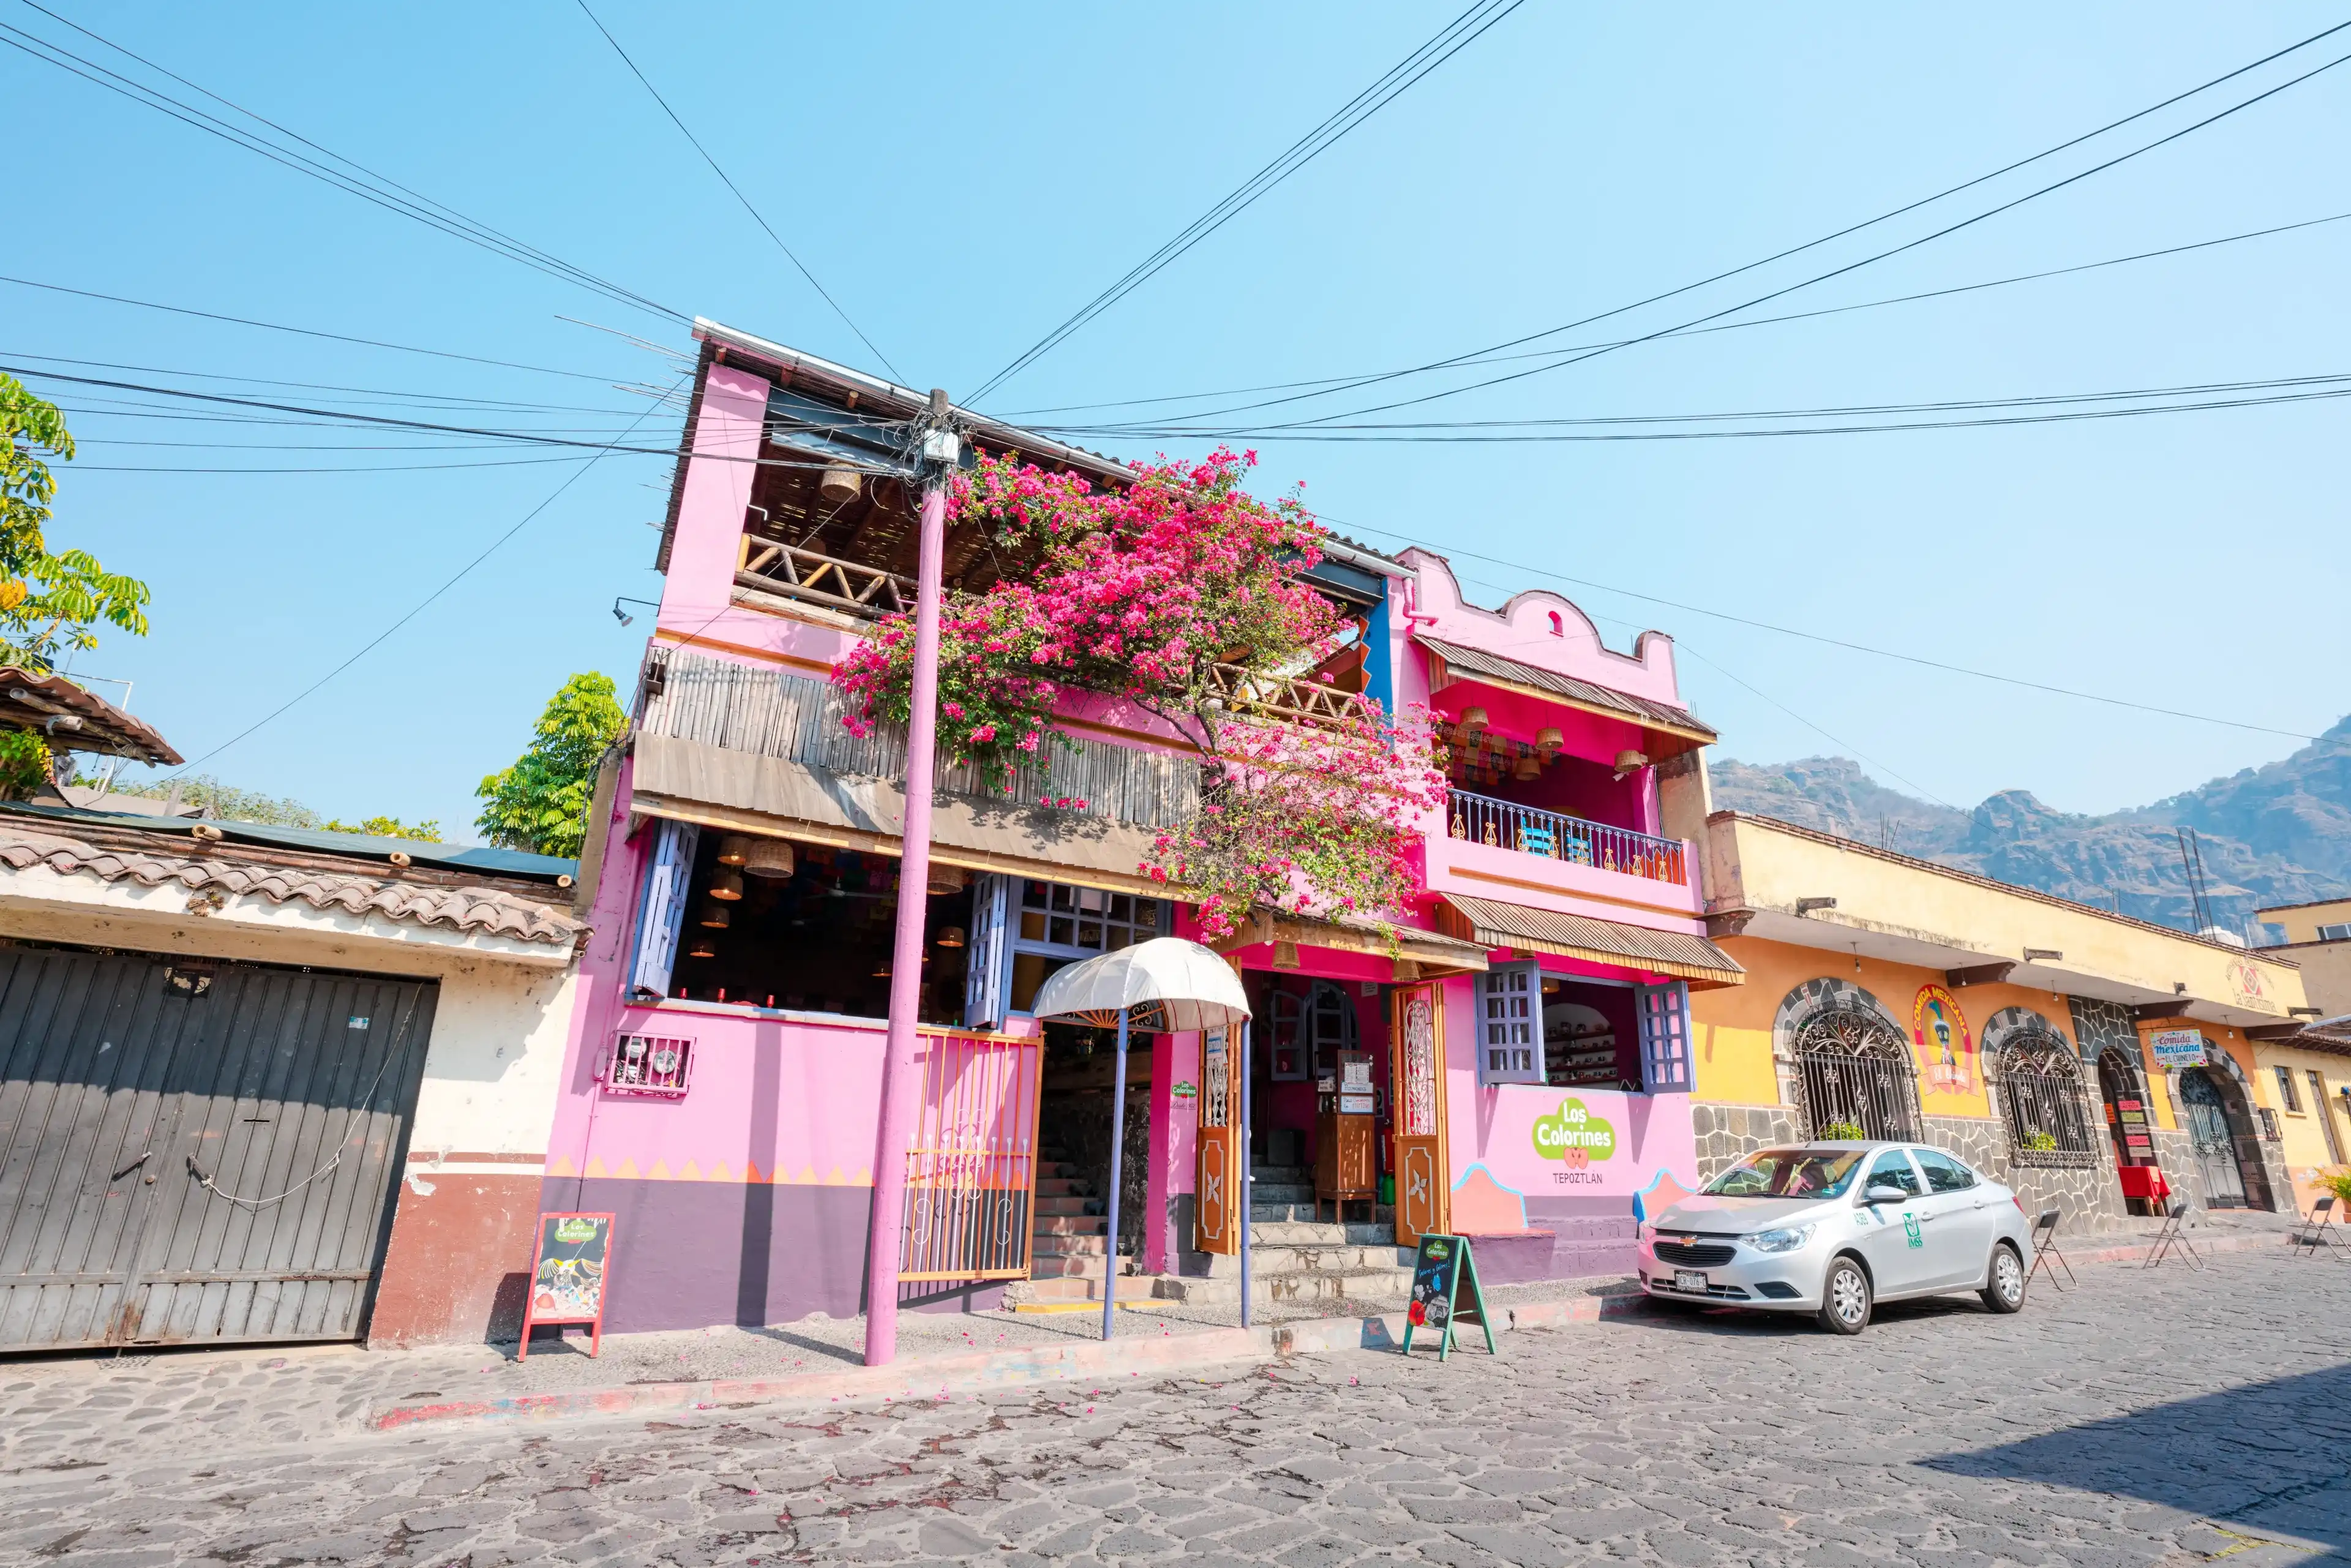 Best Tepoztlán hotels. Cheap hotels in Tepoztlán, Morelos, Mexico